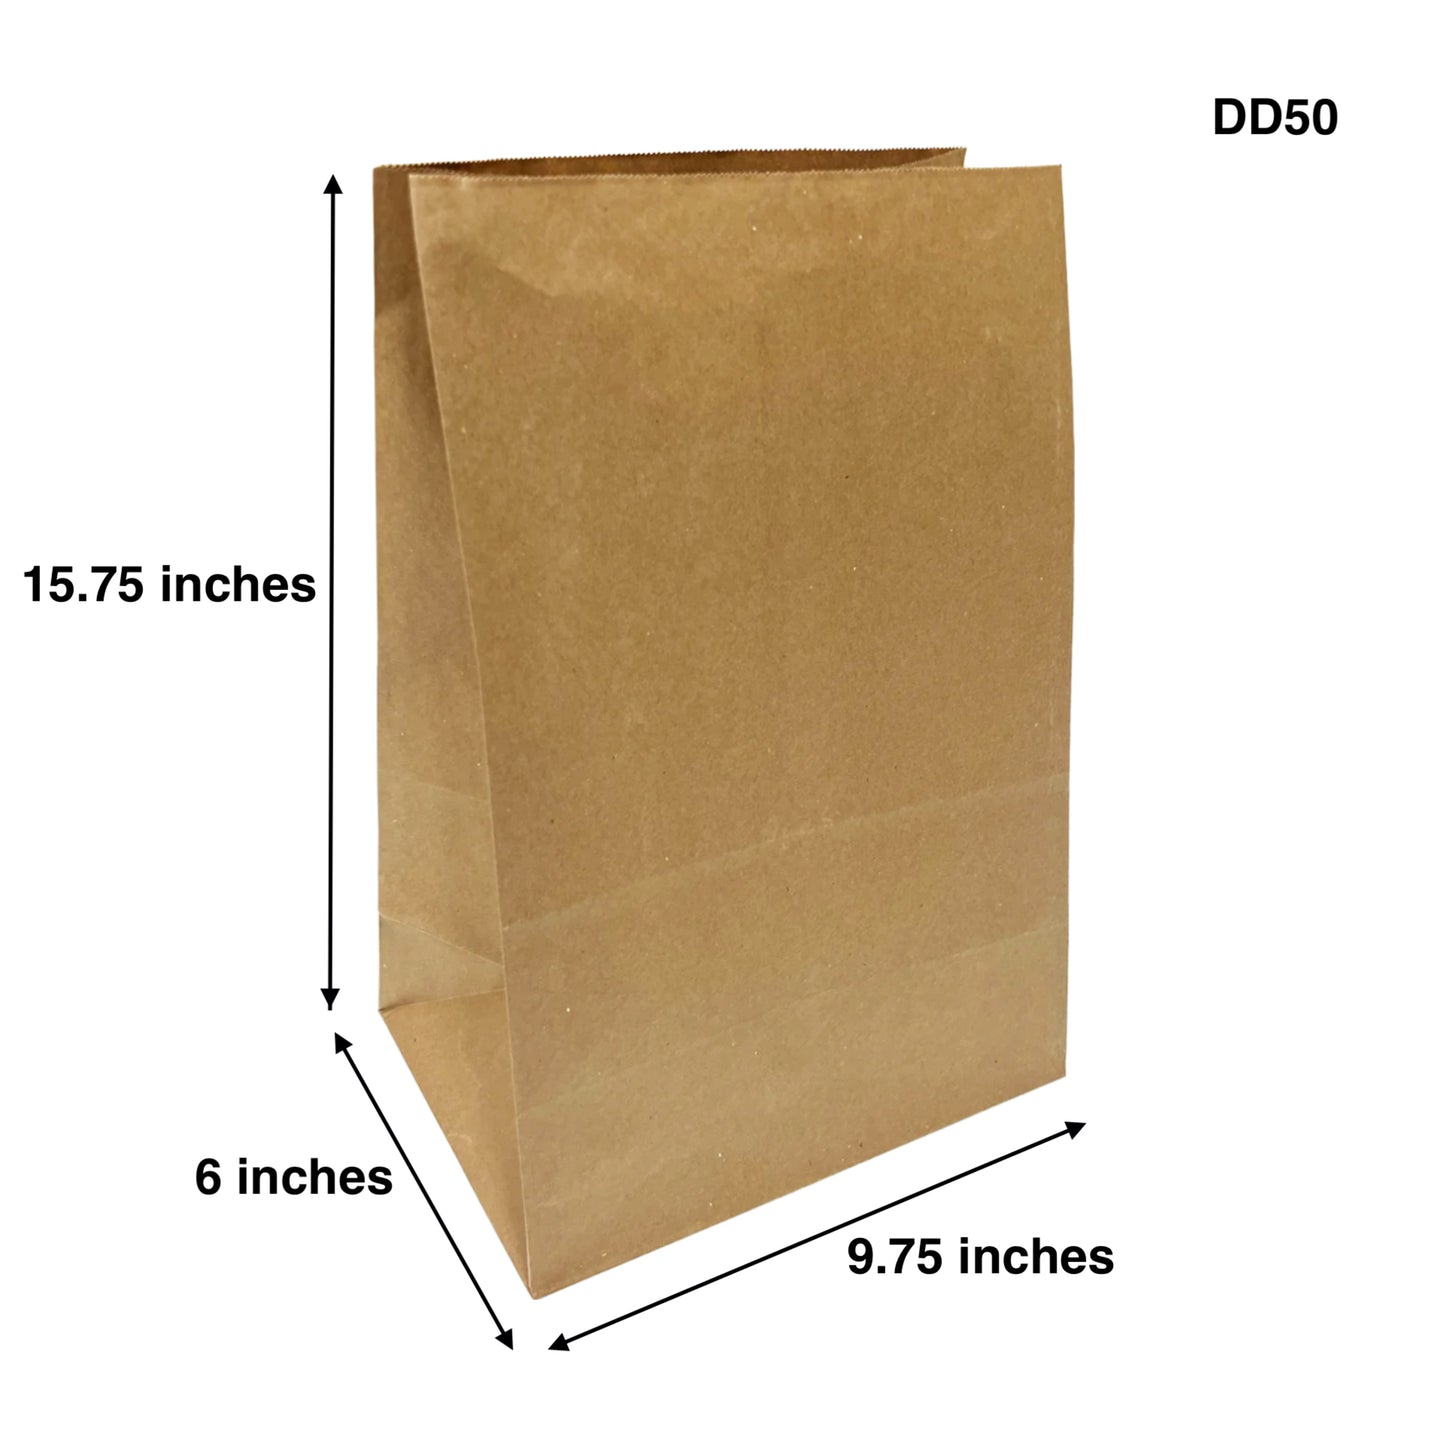 500pcs DD50 Grocery Bags 9.75x6x15.75 inches; $0.12/pc